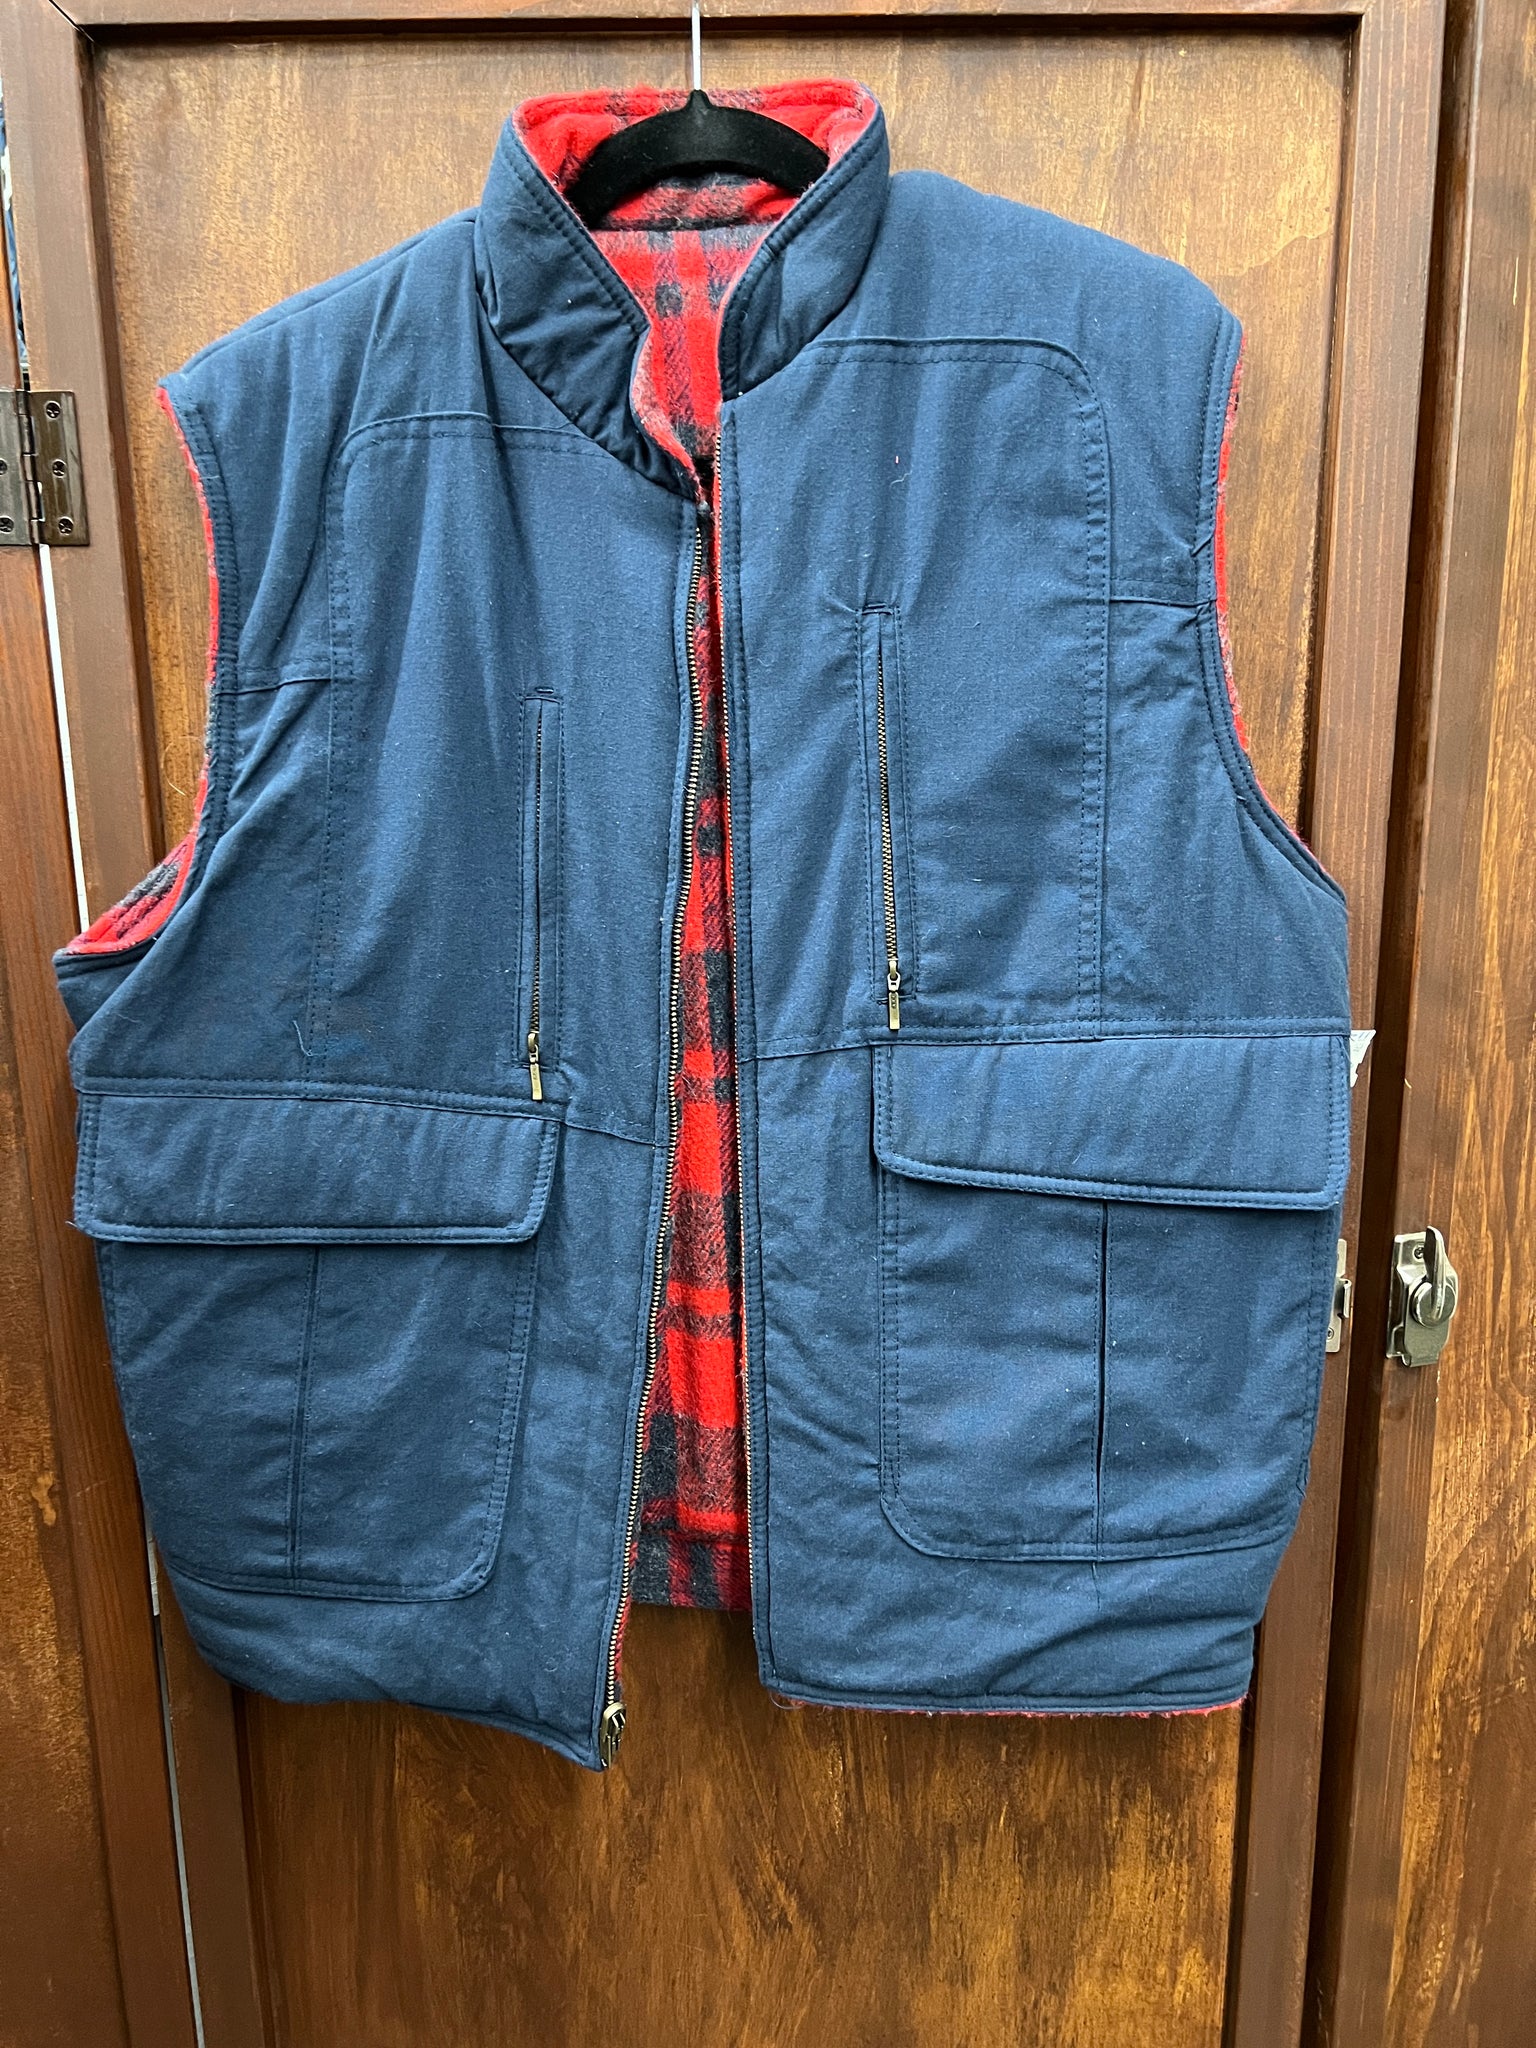 1980s MENS JACKET-VEST- navy/ red plaid lining padded